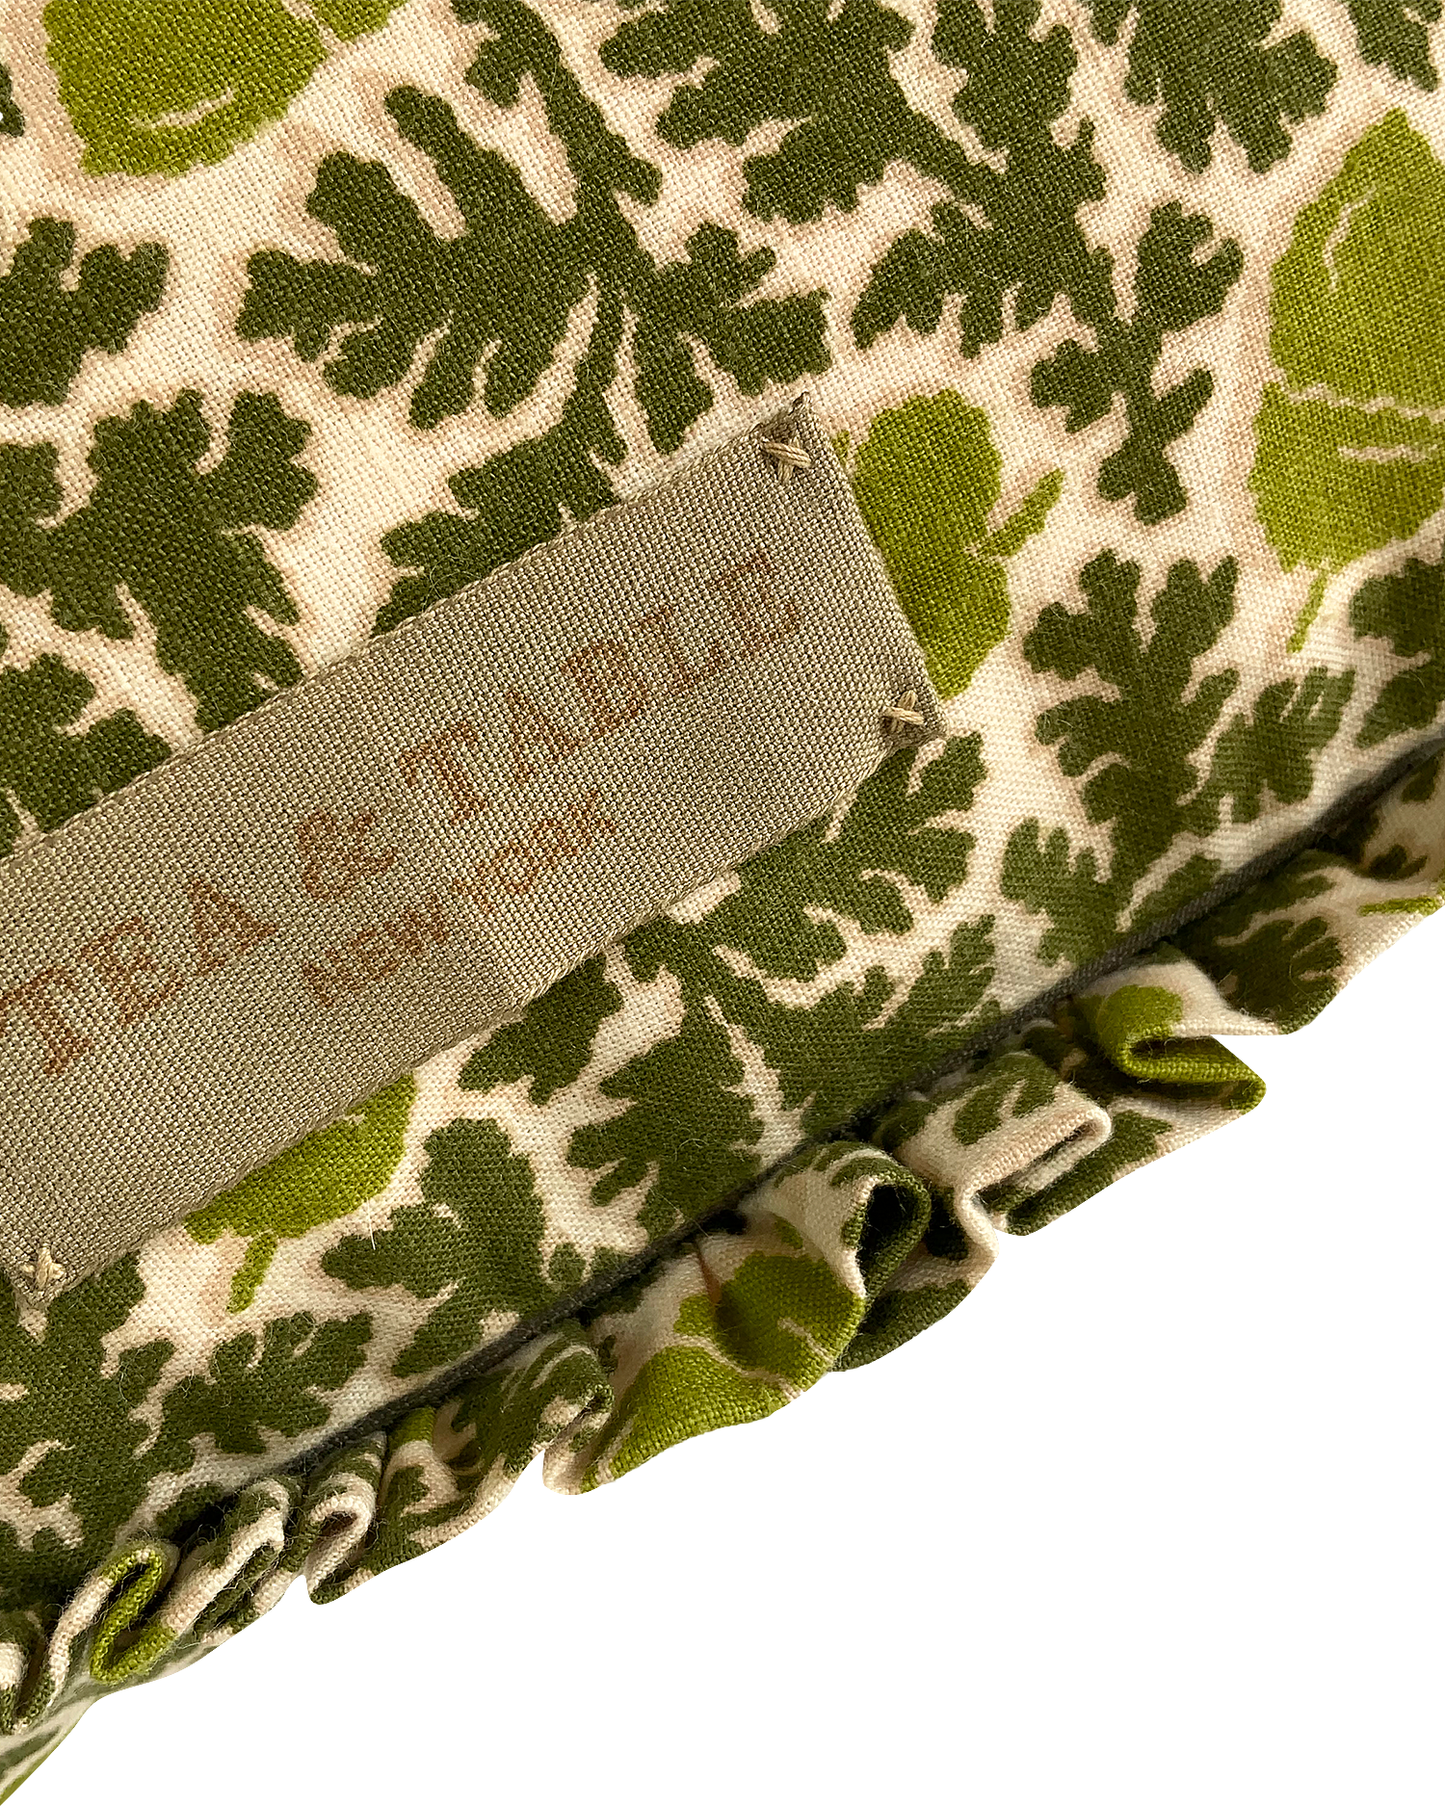 Cushion in “Acorn” Print with Ruffles in green/chartreuse